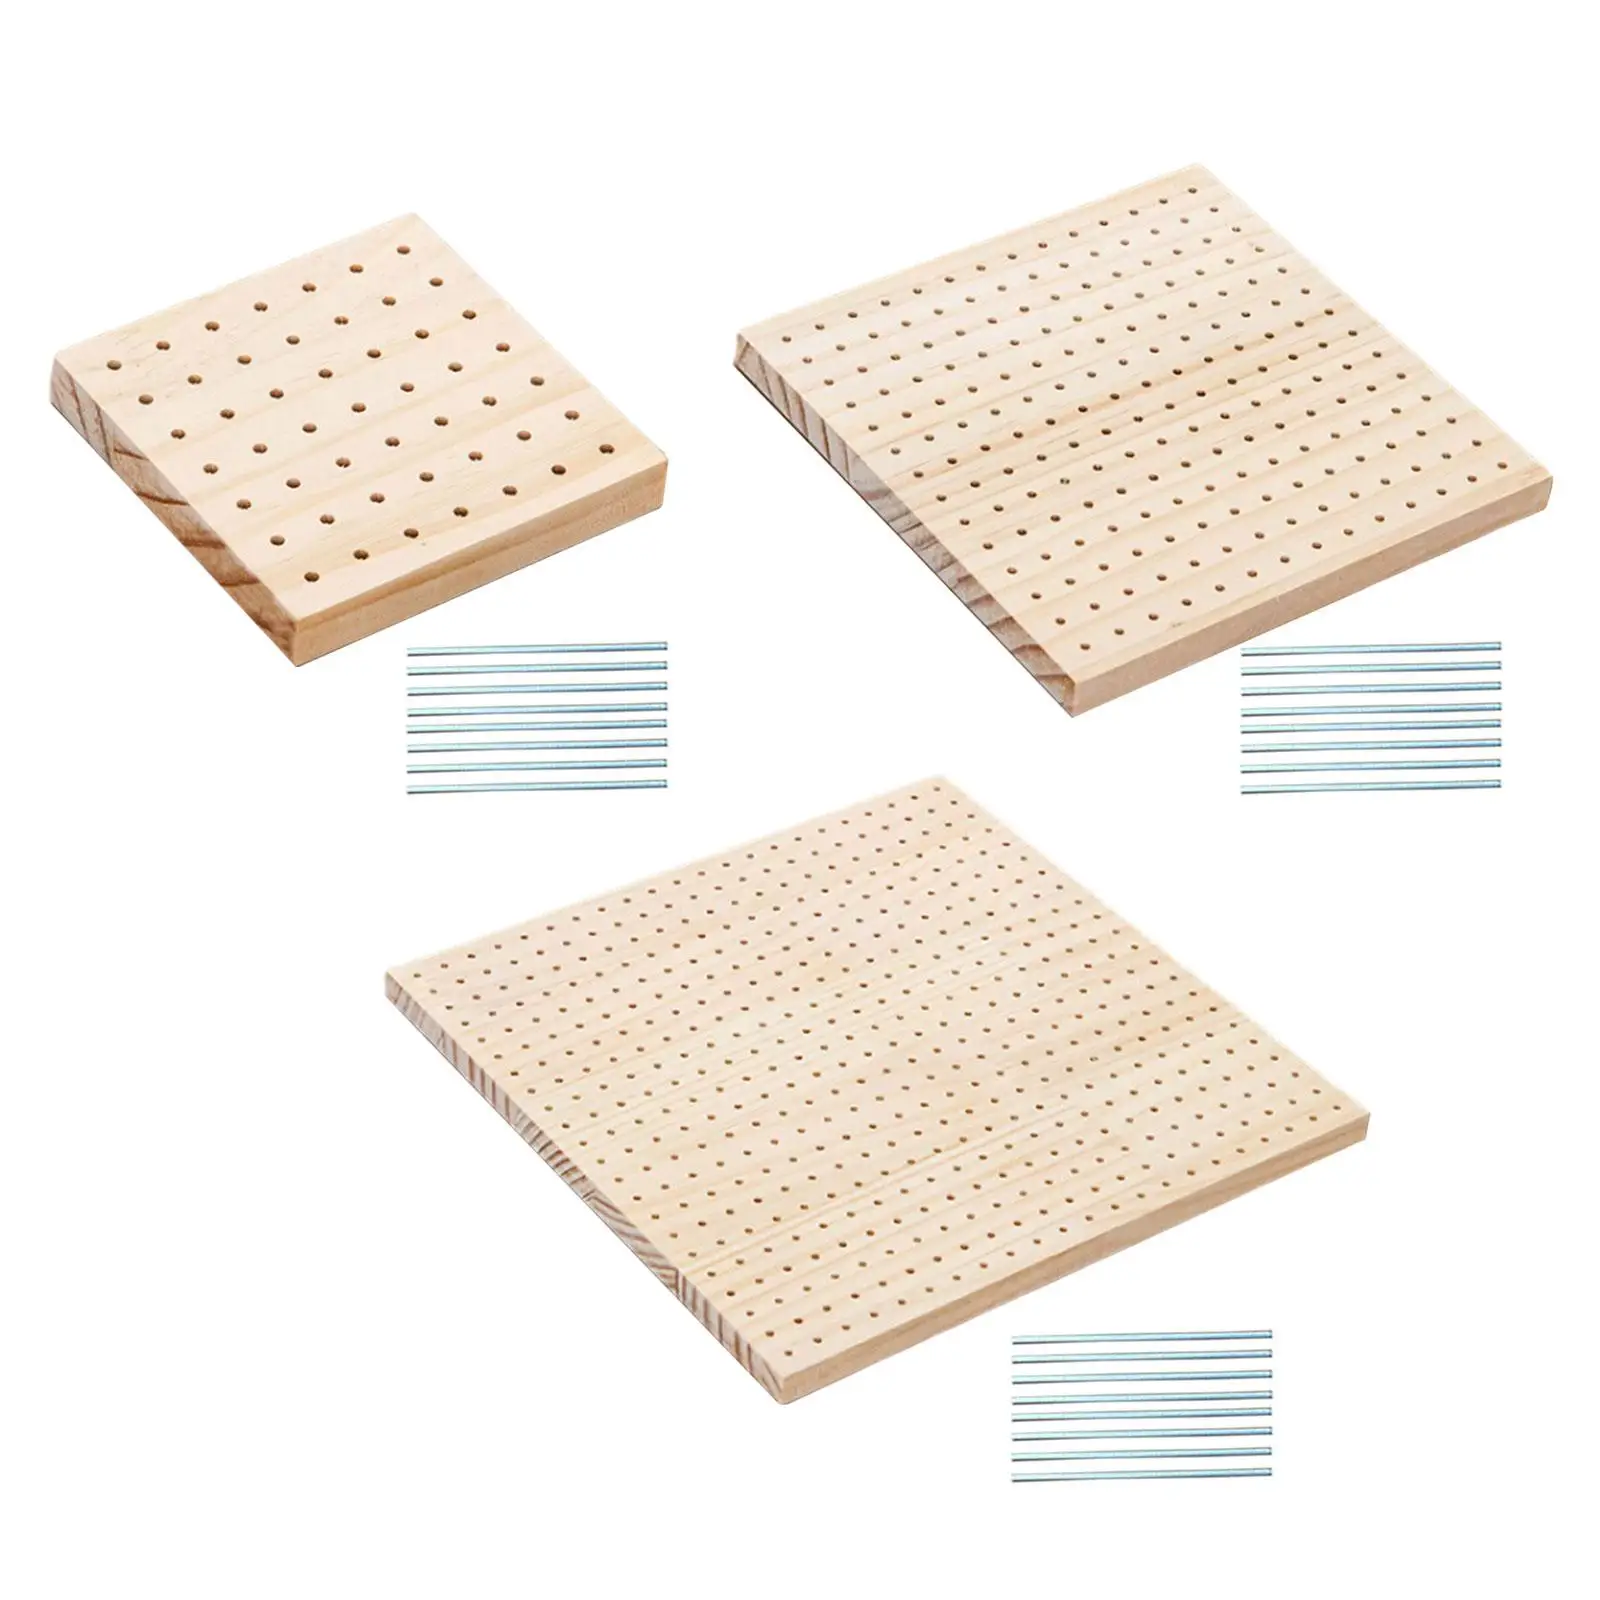 Crochet Blocking Boards Pegboard for Crochet Blocking for Granny Squares Knitting Hats Pillow Cover Grandmothers Crafts Lover